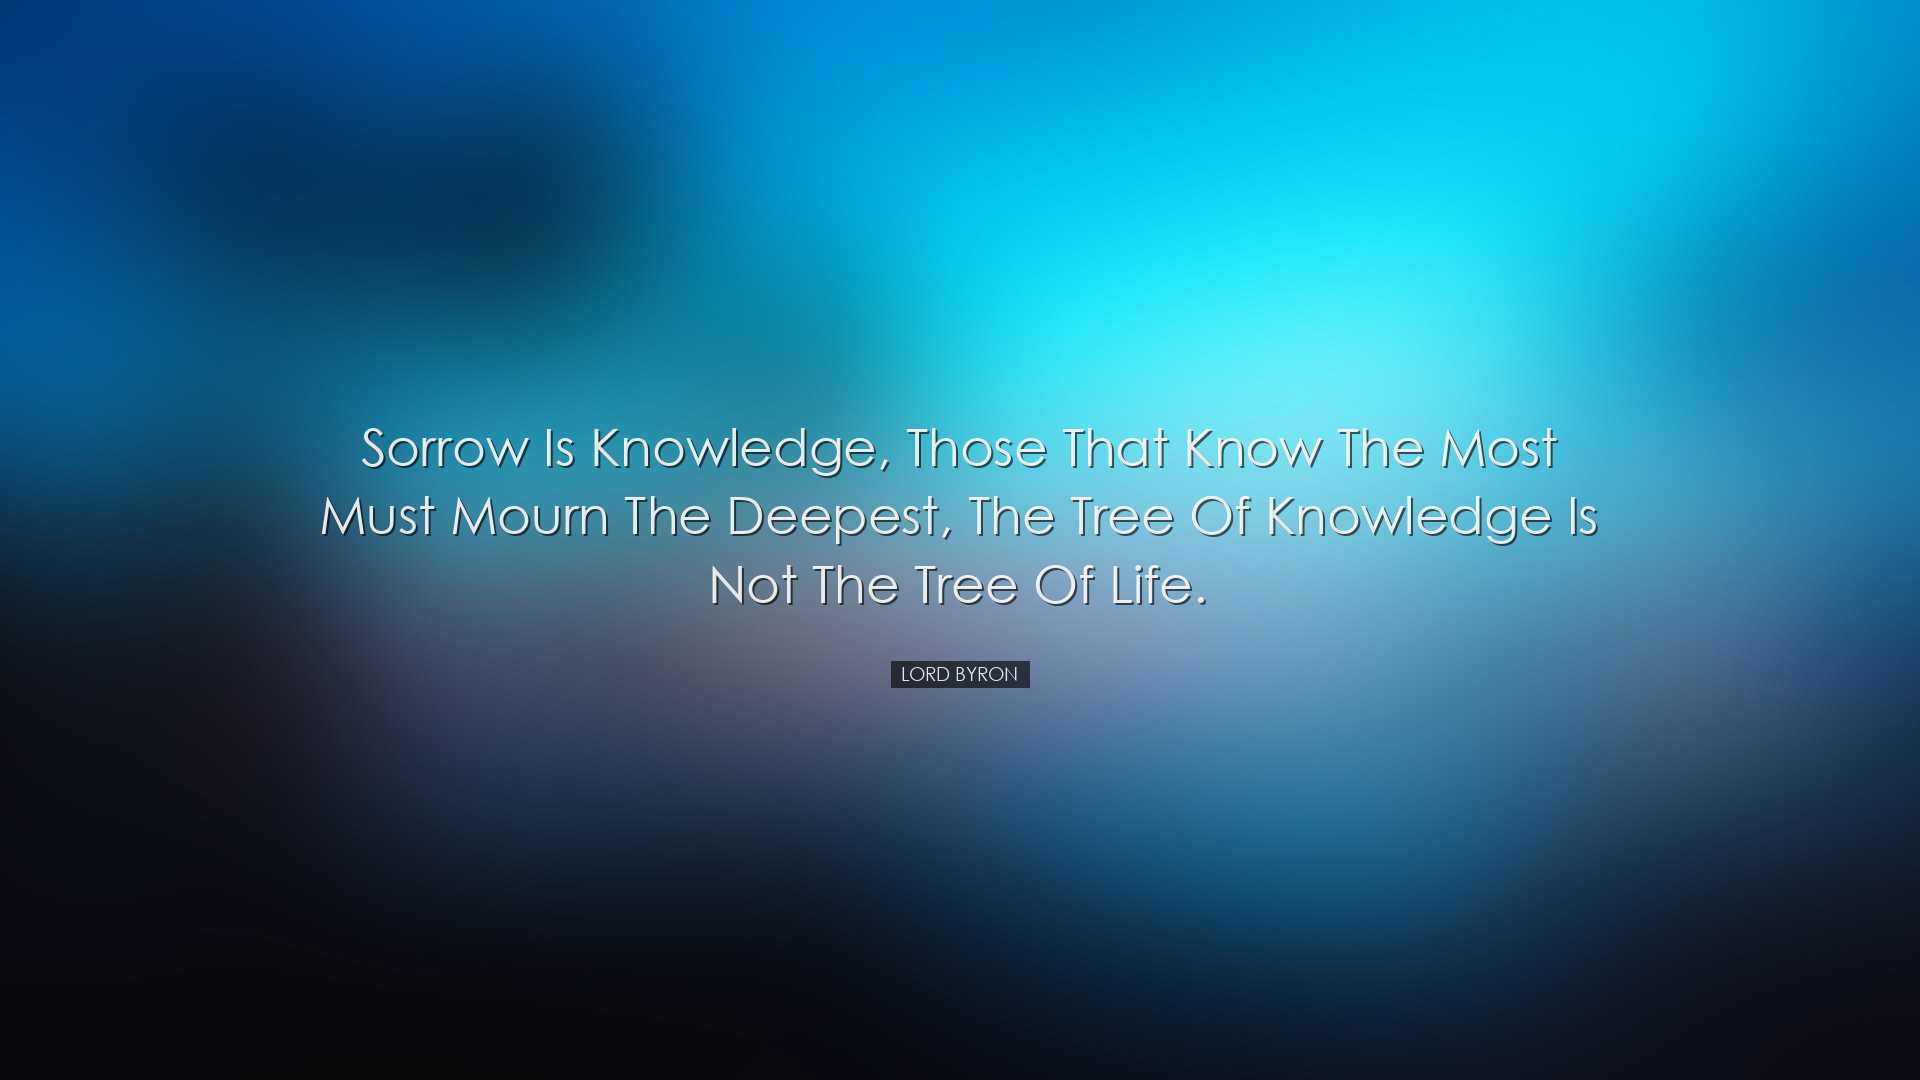 Sorrow is knowledge, those that know the most must mourn the deepe